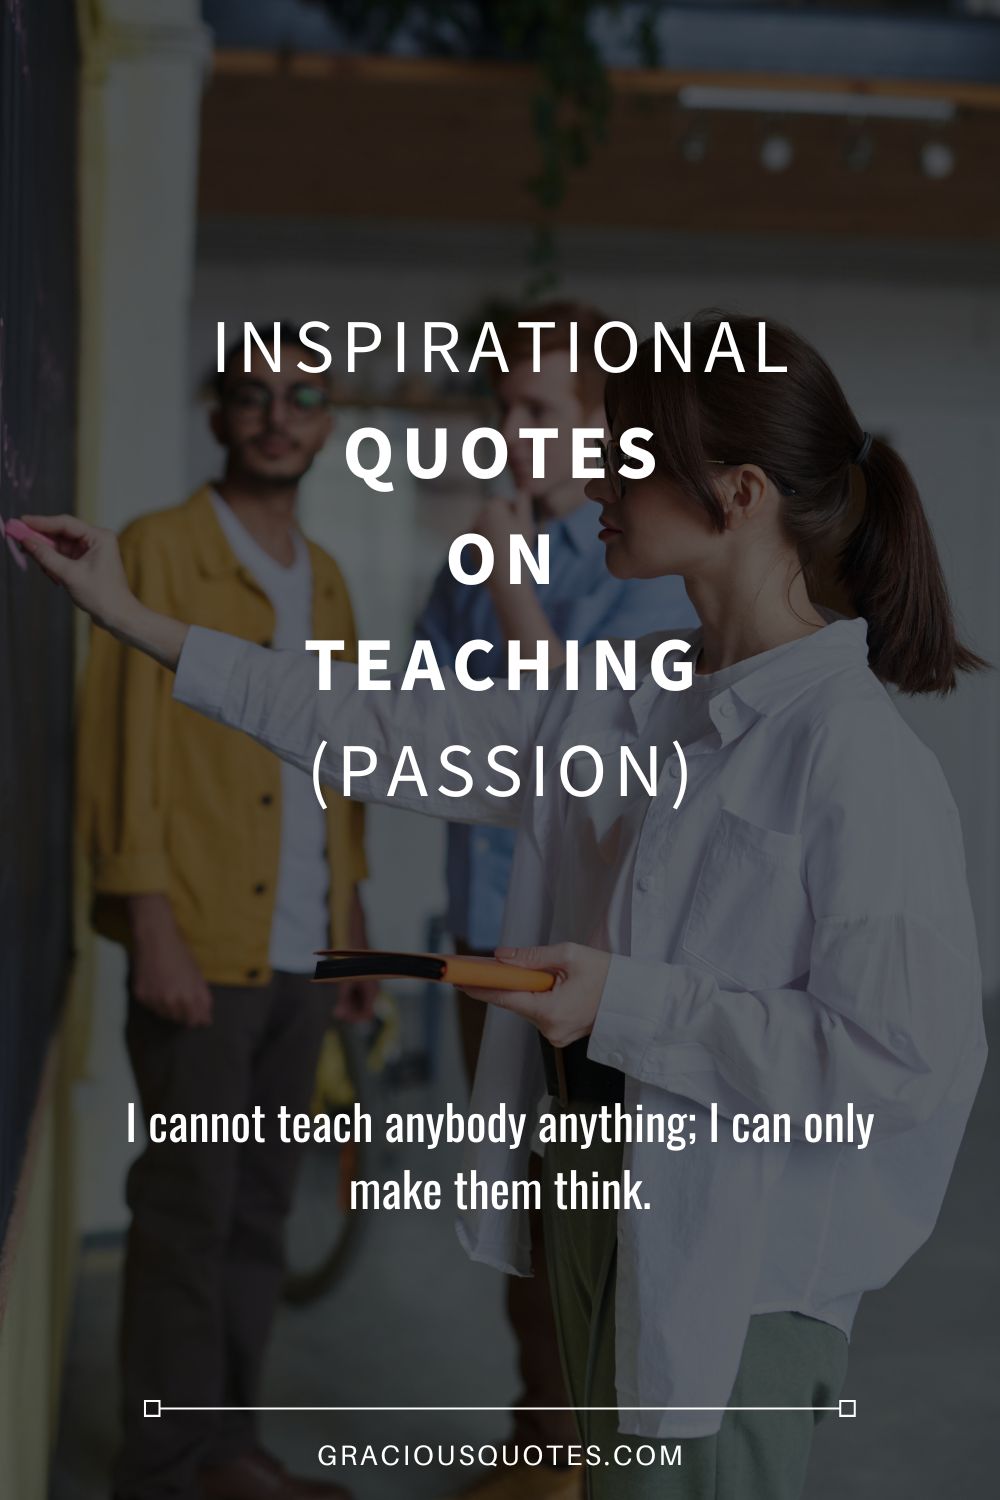 Inspirational Quotes on Teaching (PASSION) - Gracious Quotes